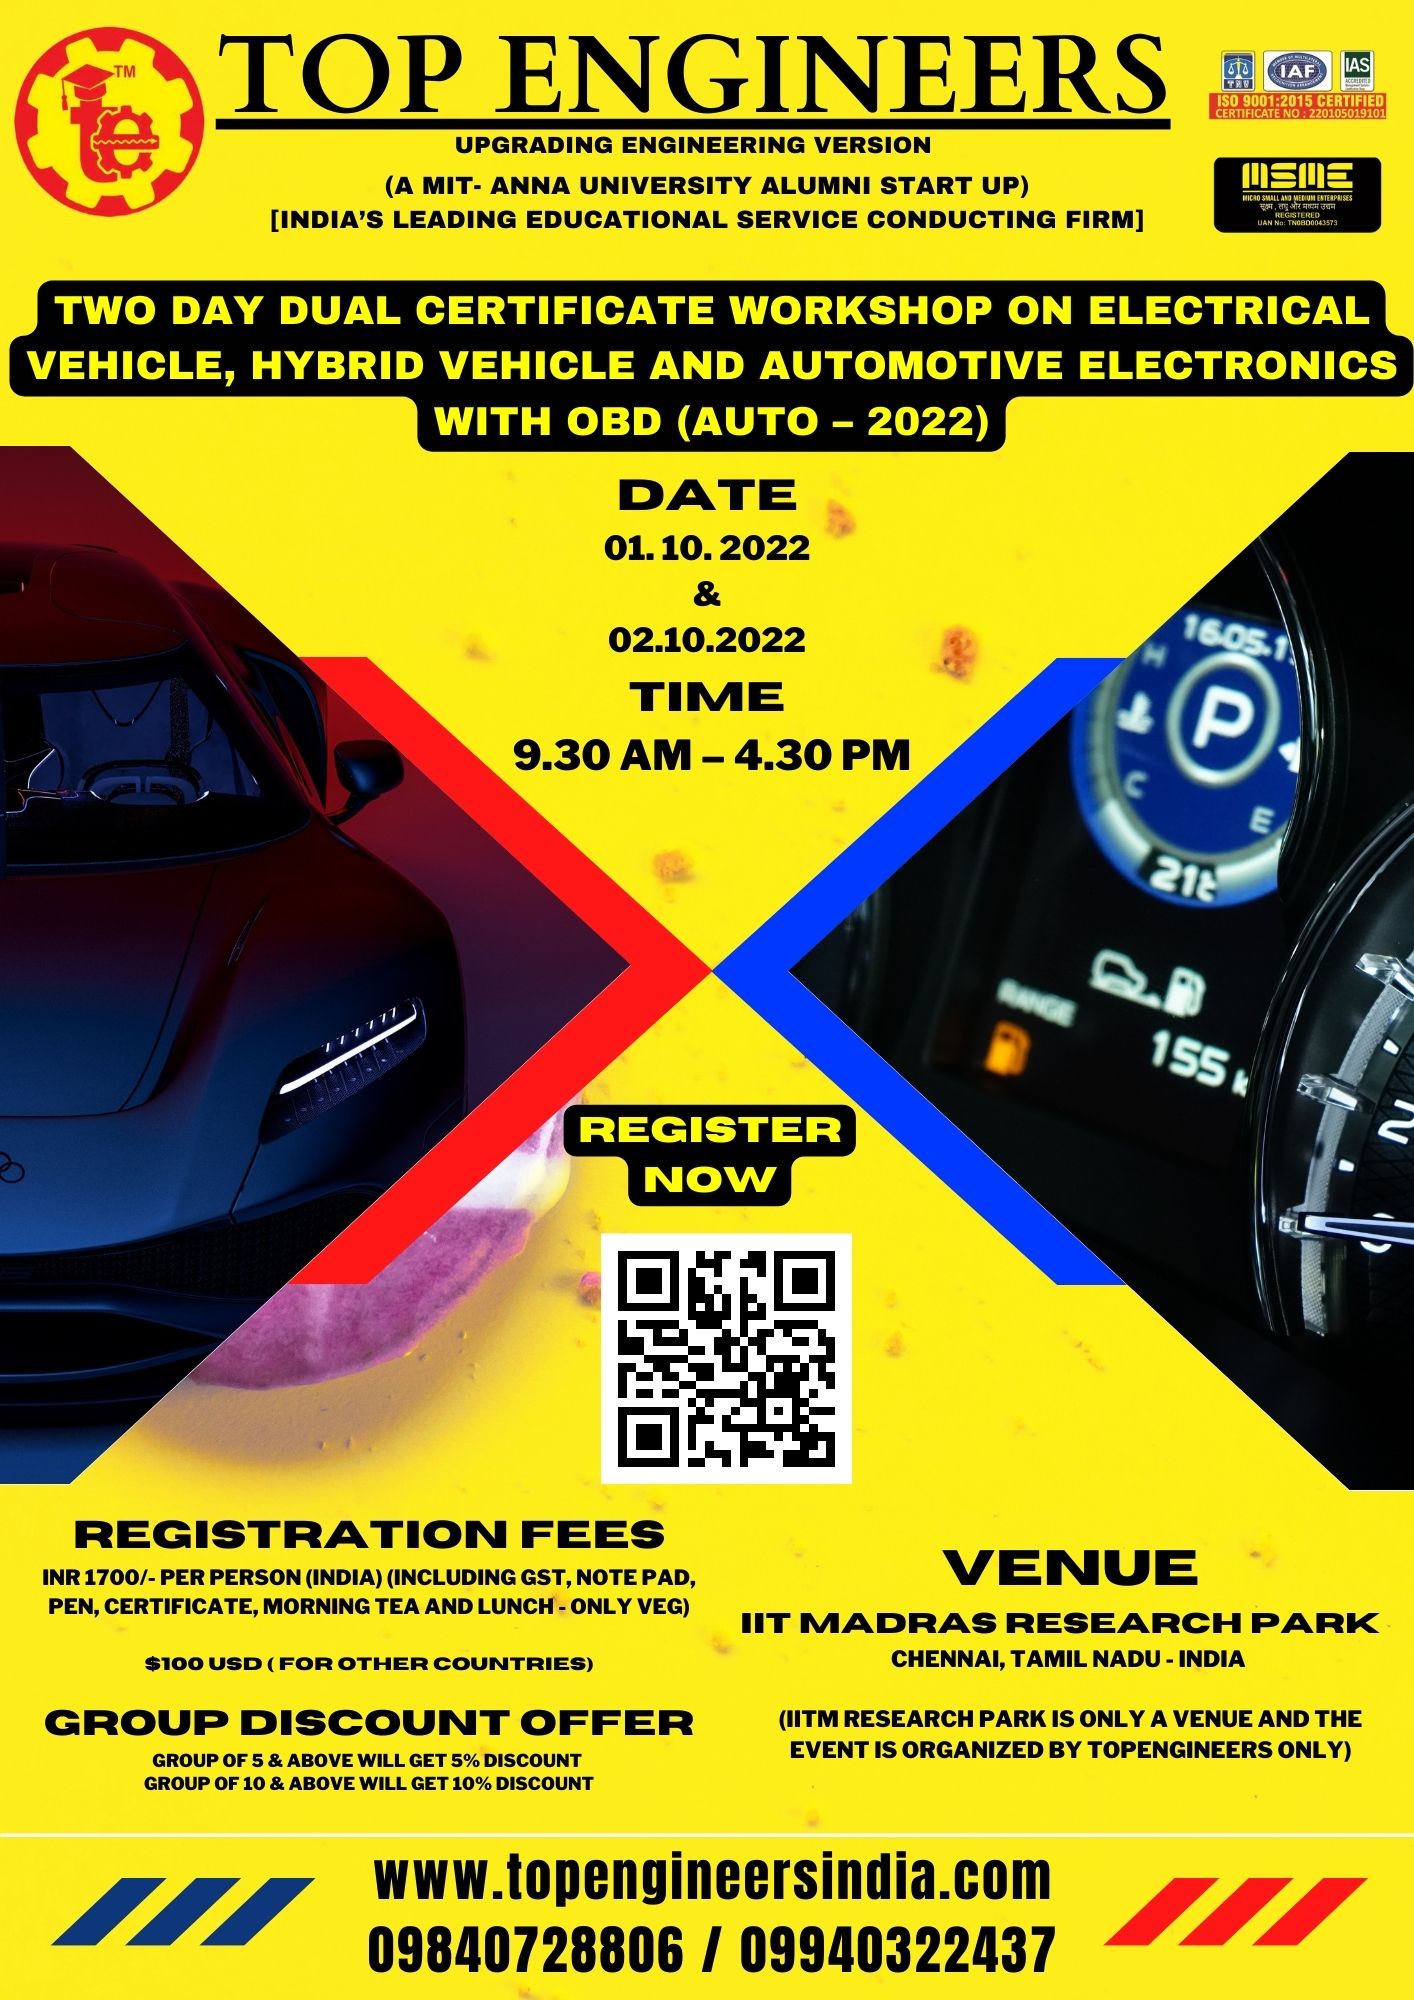 Two Day Dual Certificate Workshop on Electrical Vehicle, Hybrid Vehicle and Automotive Electronics with OBD (Auto 2022)